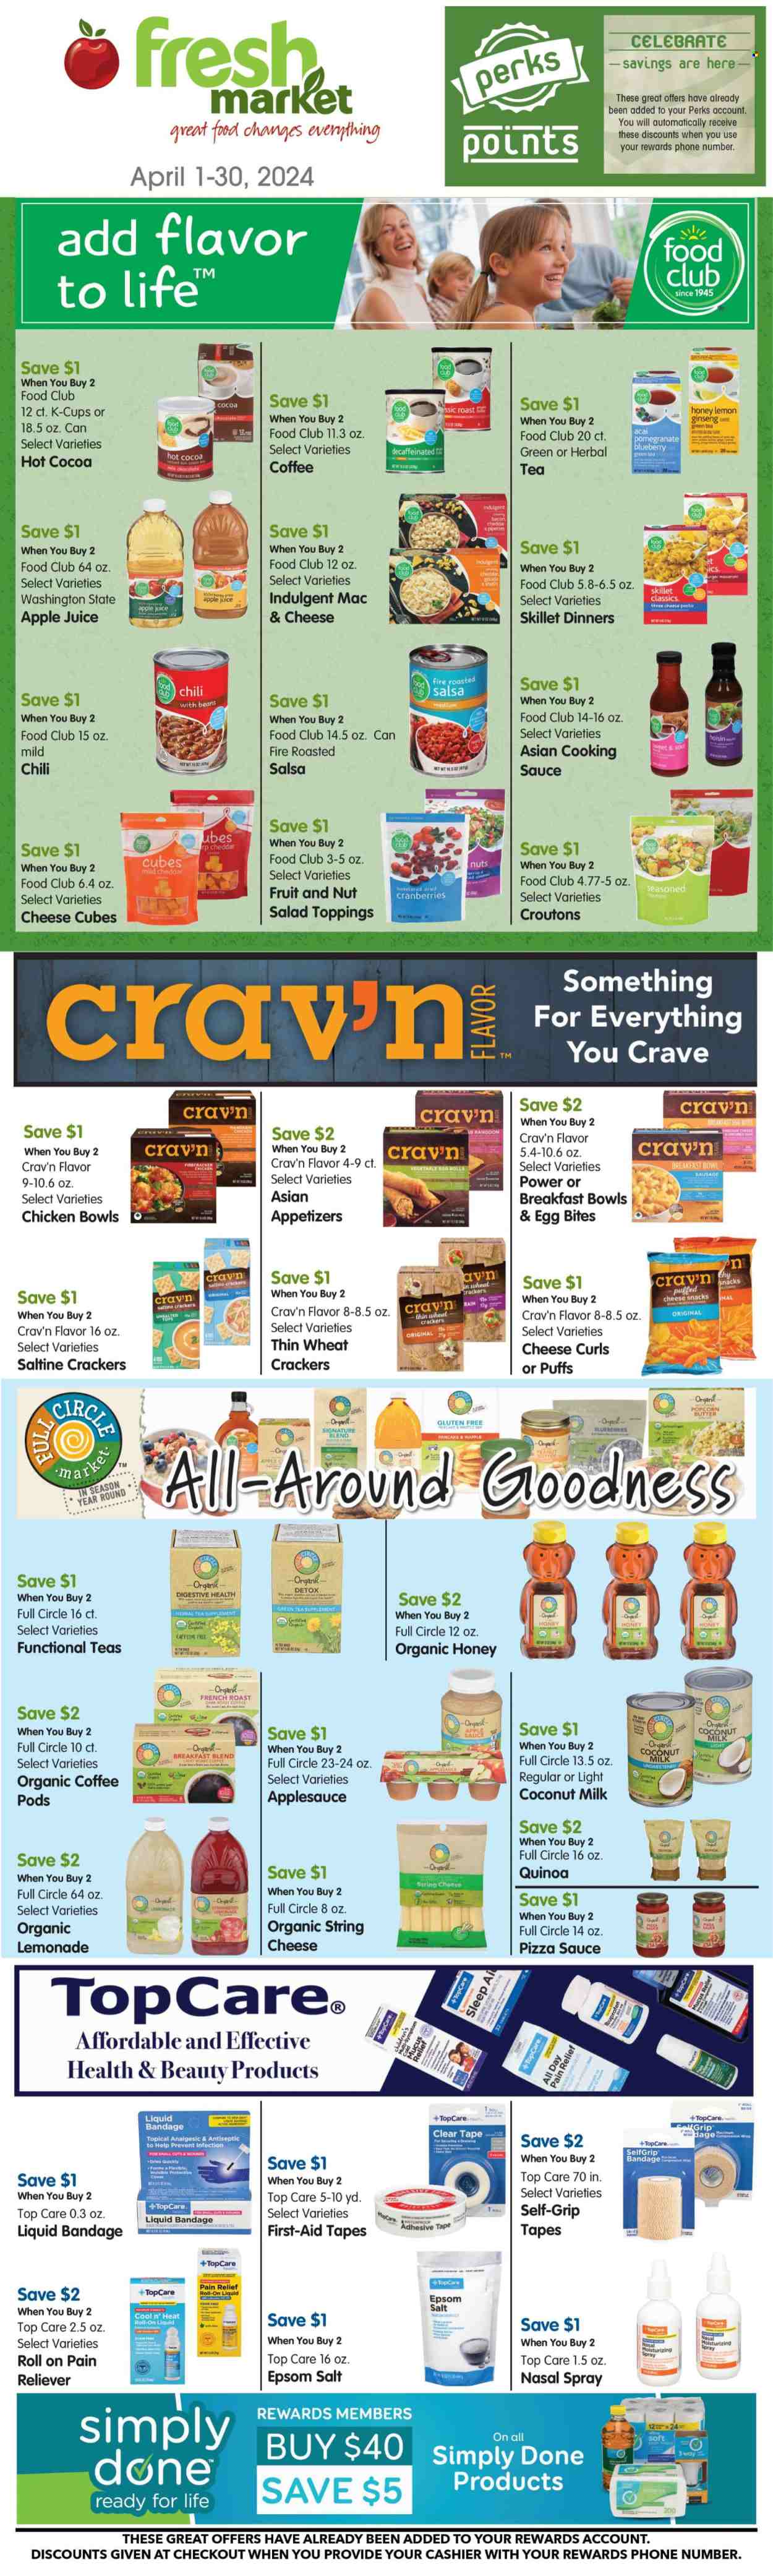 thumbnail - Fresh Market Flyer - 04/01/2024 - 04/30/2024 - Sales products - puffs, macaroni & cheese, macaroni, snack, pasta, egg rolls, breakfast bowl, ready meal, uncured ham, gouda, mild cheddar, string cheese, cheddar, plant-based milk, milk chocolate, crackers, popcorn, salty snack, croutons, topping, coconut milk, cranberries, pizza sauce, quinoa, hoisin sauce, dressing, salsa, apple sauce, dried fruit, apple juice, lemonade, juice, hot cocoa, green tea, herbal tea, tea bags, coffee pods, organic coffee, coffee capsules, K-Cups, breakfast blend, chicken, Fairy, pain relief, ginseng, nasal spray, epsom salt, sauce. Page 1.